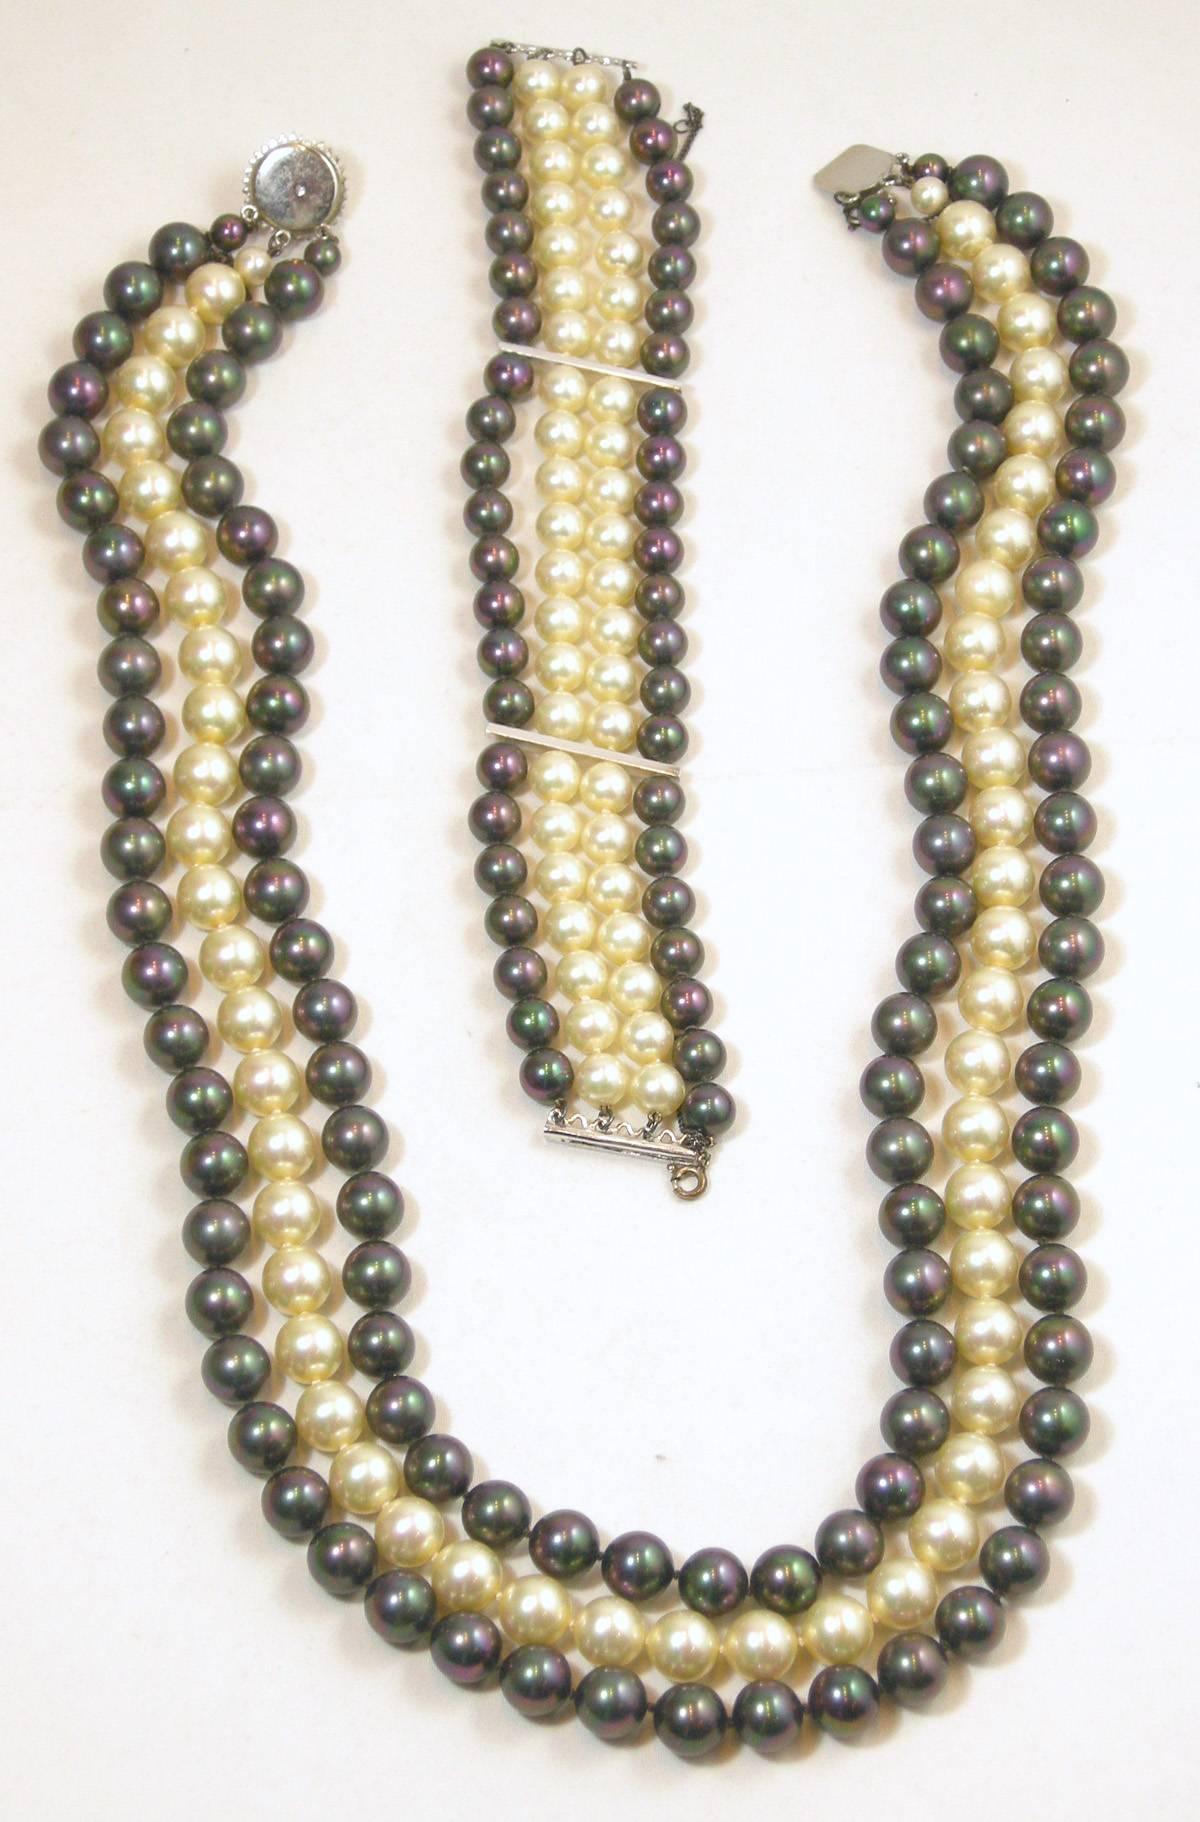 This is a wonderful faux pearl set from the 1950s.  The necklace has 3 strands of pearls…all hand tied.  The two outer strands have an iridescent grey color with a strand of white pearls in the middle.  The necklace is approx. 23” long and 1-1/2”